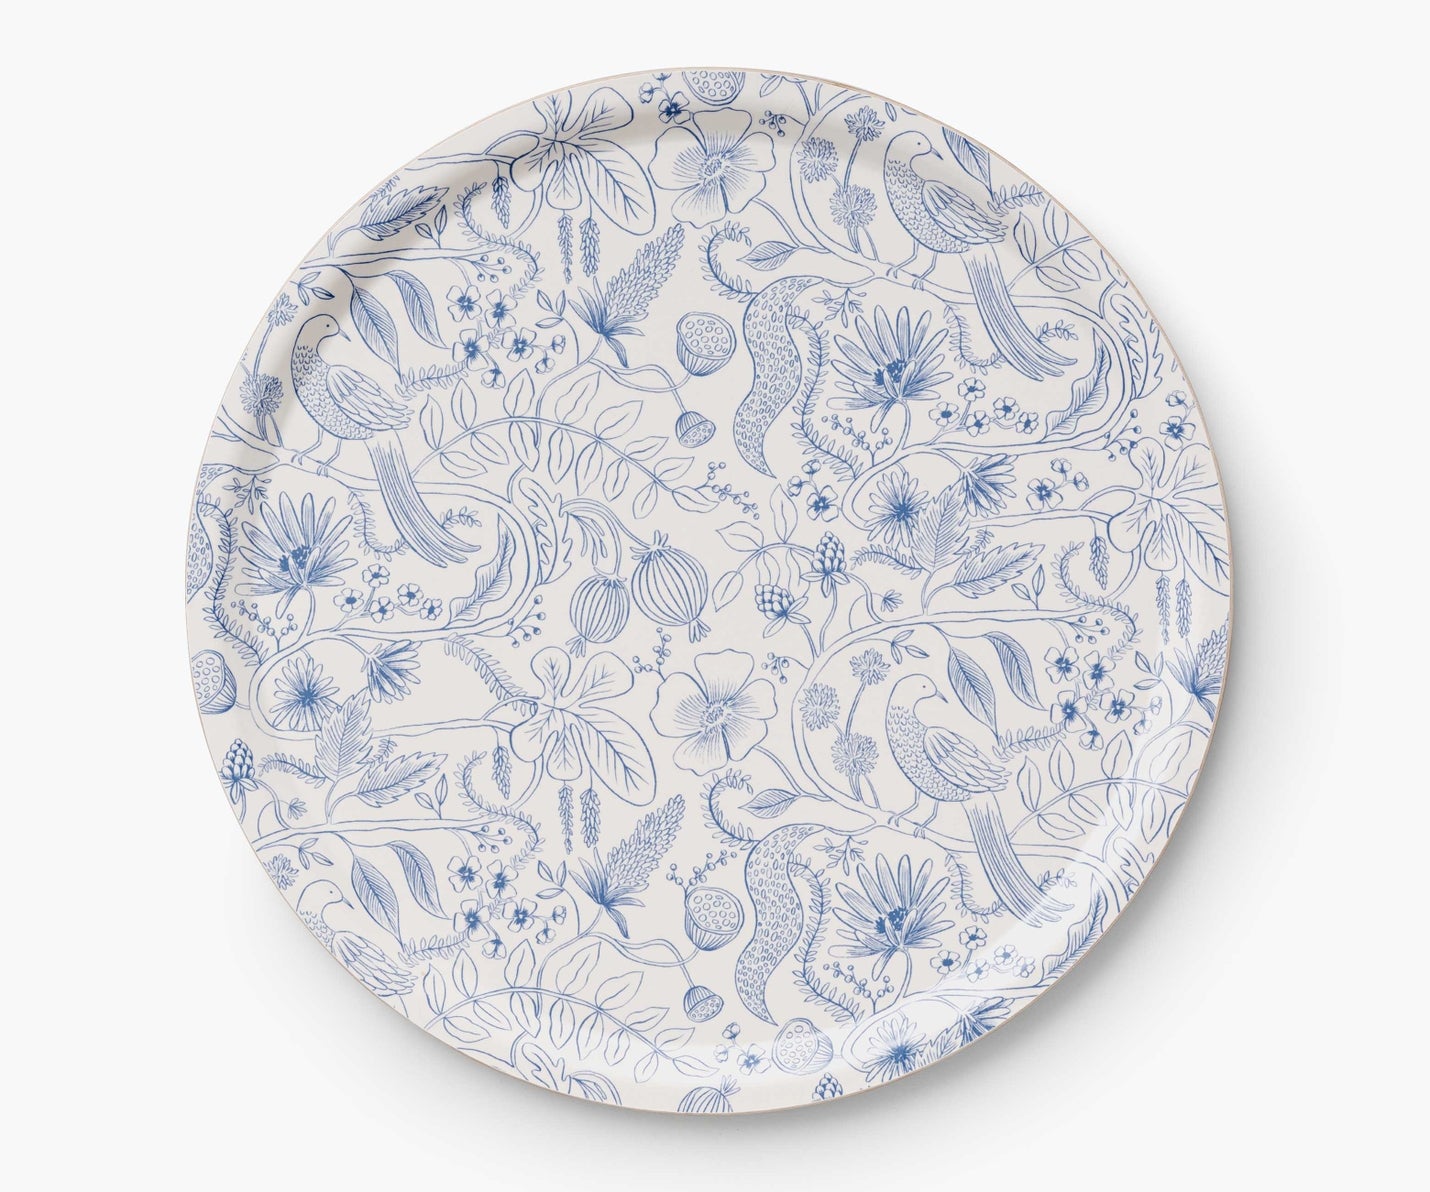 blue and white plate with flower patterns